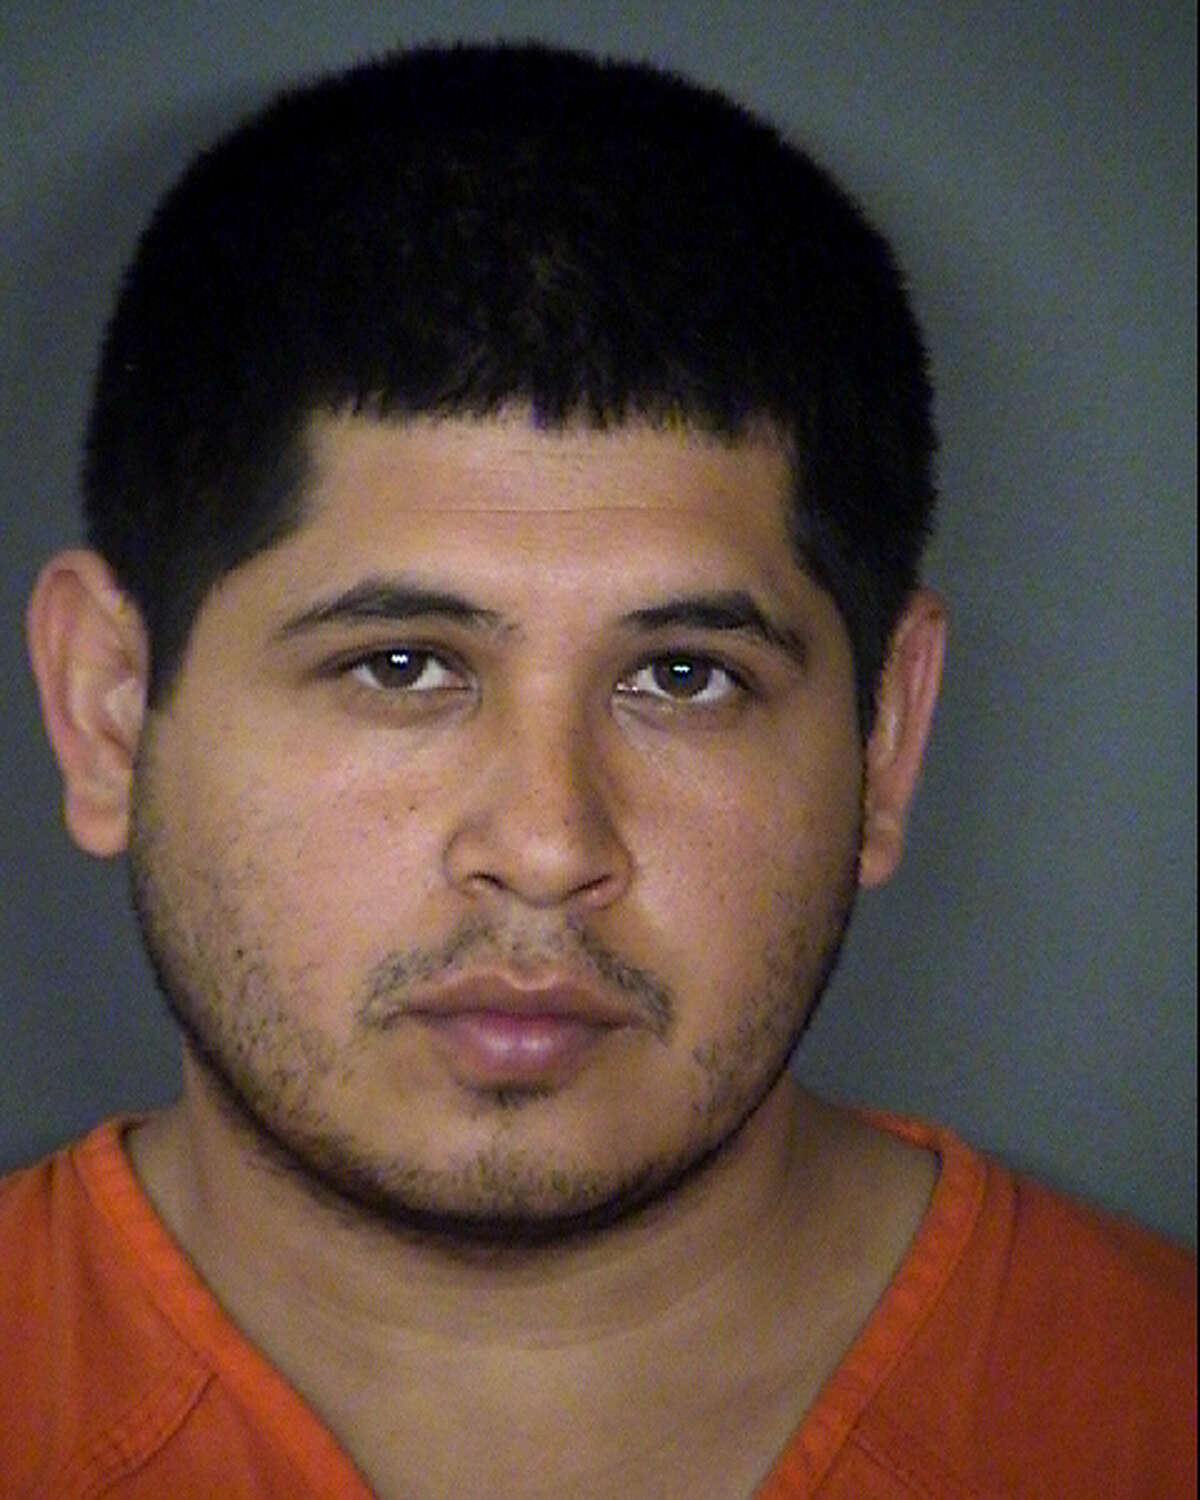 Jesse Paez Jr., 29, faces an aggravated assault with a deadly weapon charge, a second-degree felony. He remains in the Bexar County Jail on a $30,000 bond.